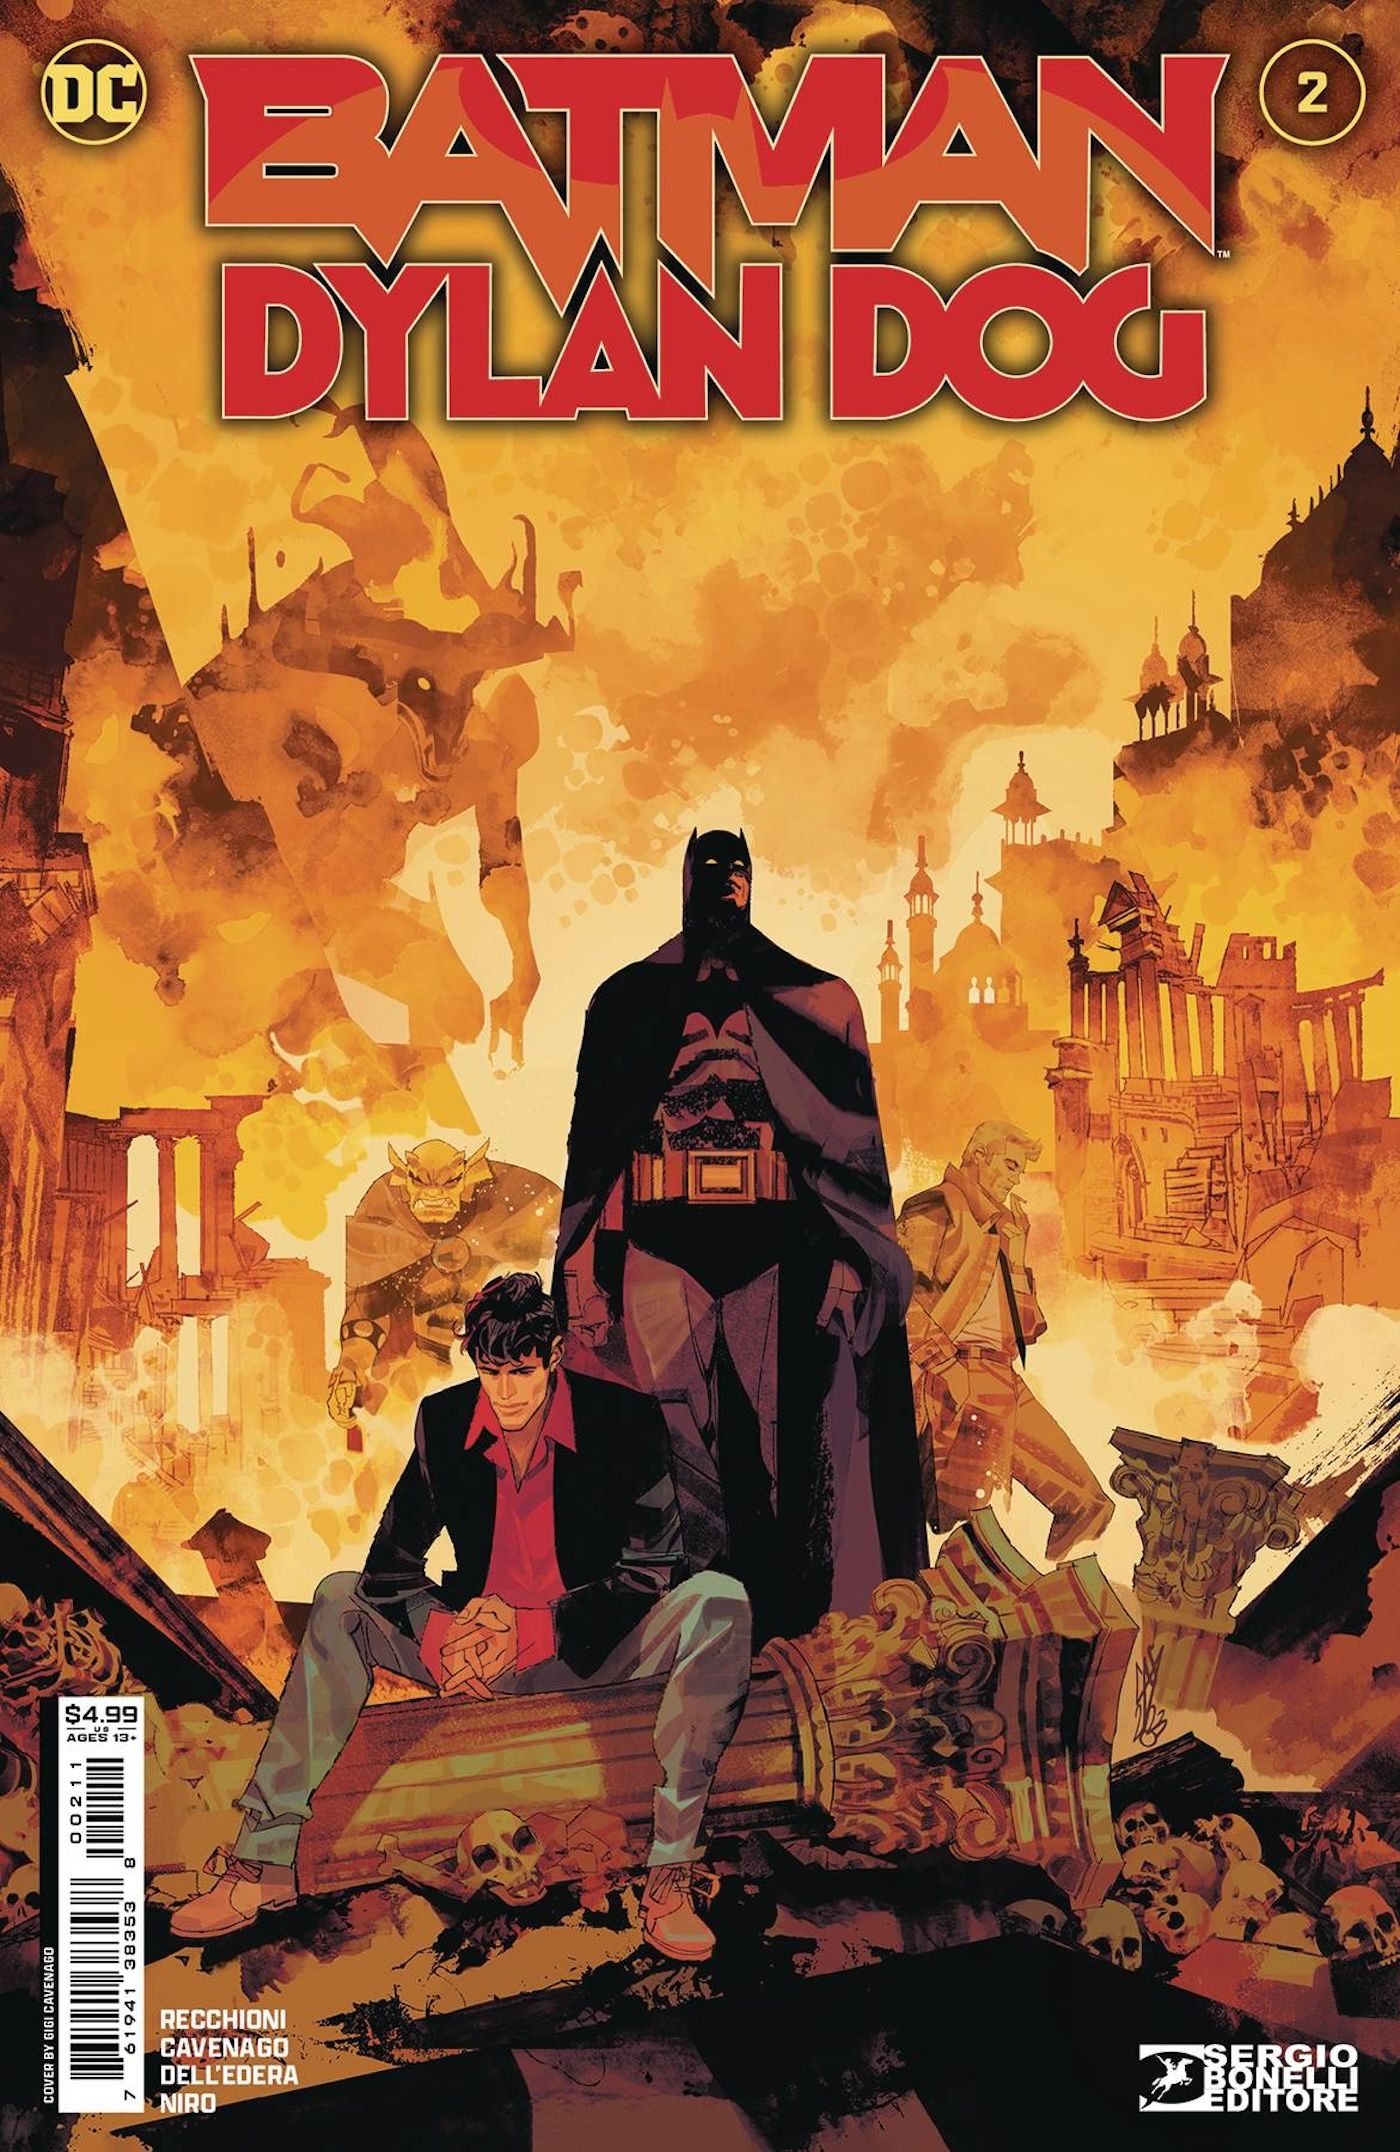 Batman Dylan Dog 2 Main Cover: Batman and Dylan Dog pose in front of a city on fire.